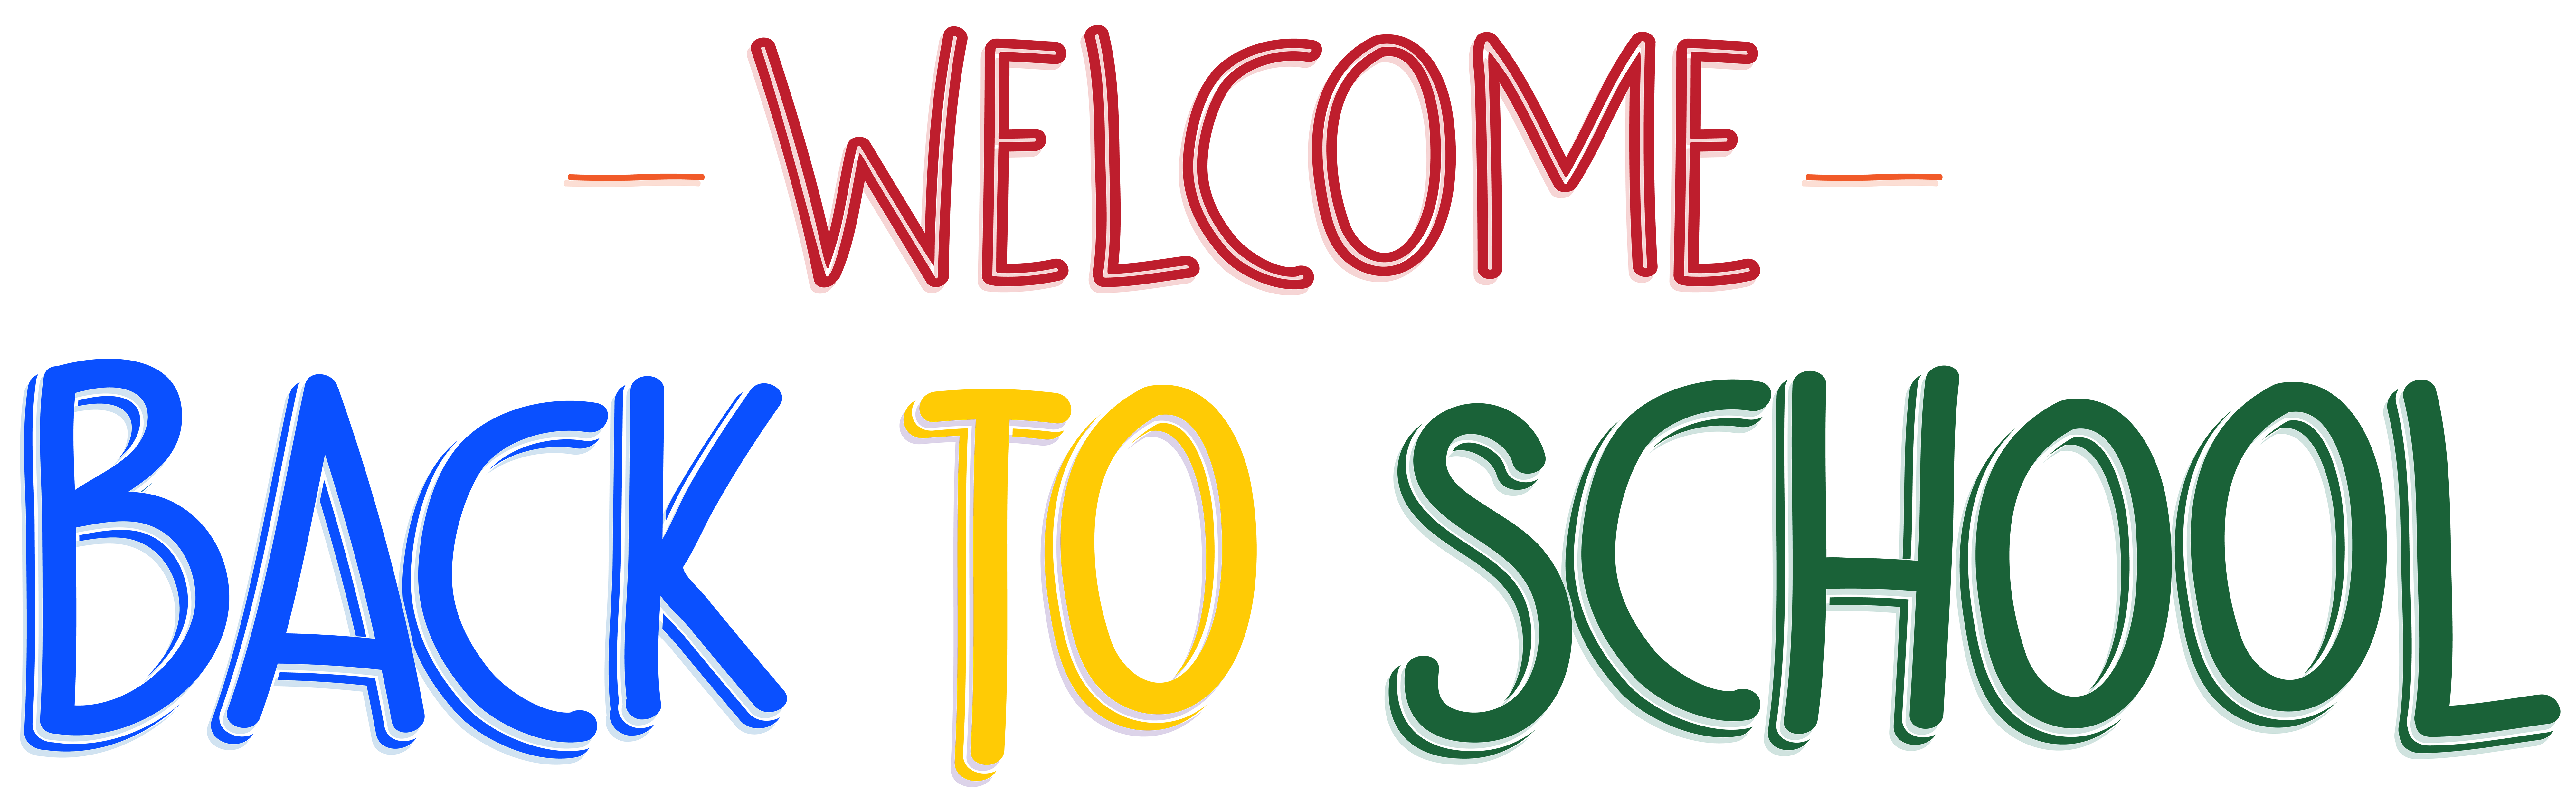 welcome back to school clipar - Back To School Clipart Images